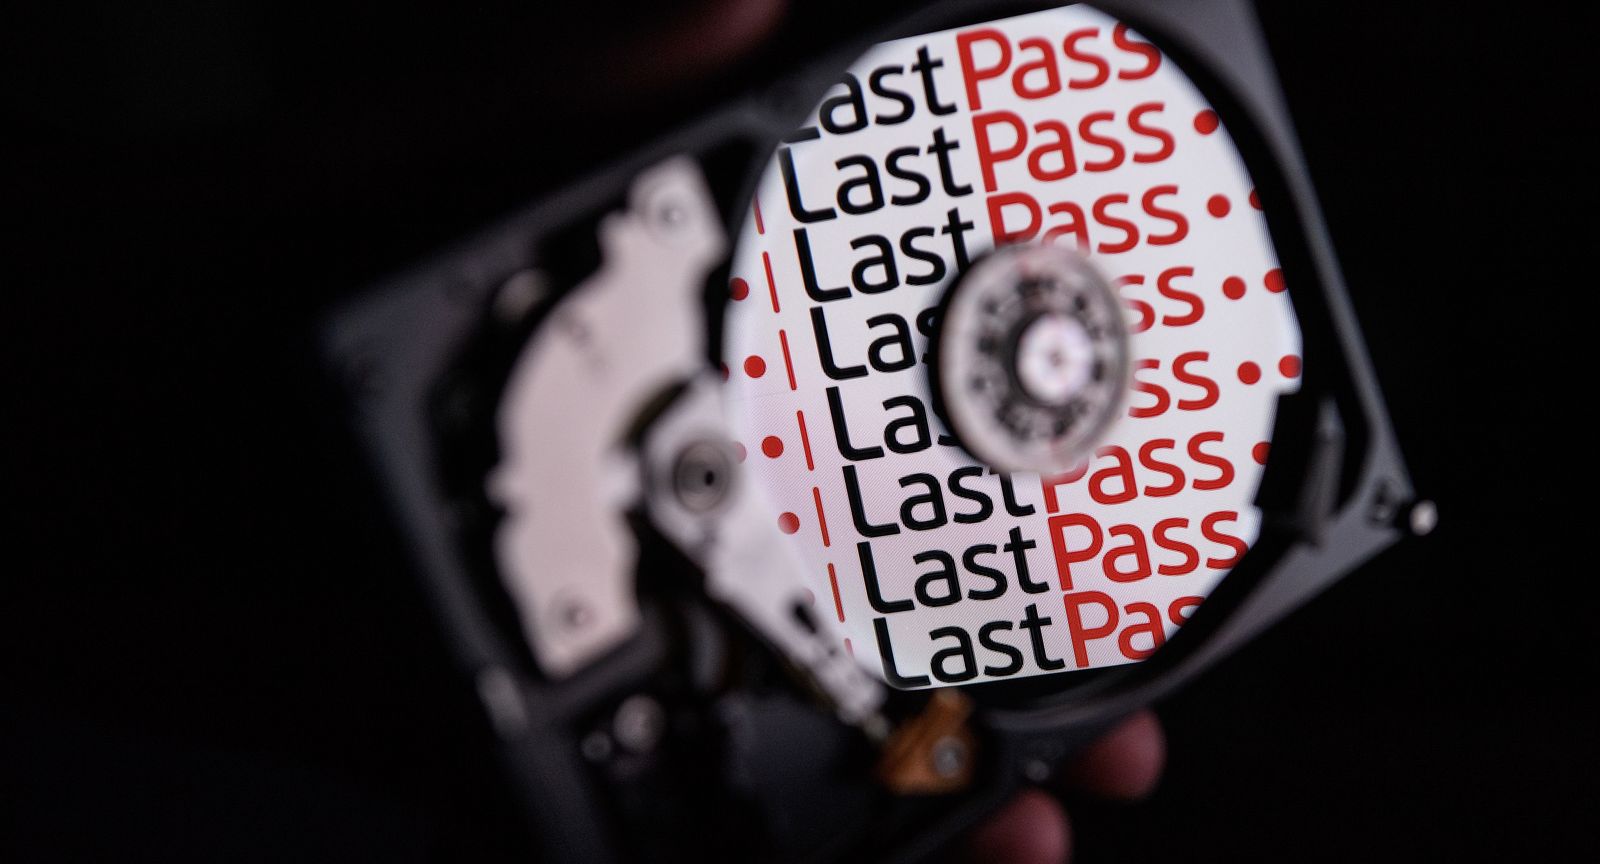 After LastPass hack, only its master passwords remain uncompromised